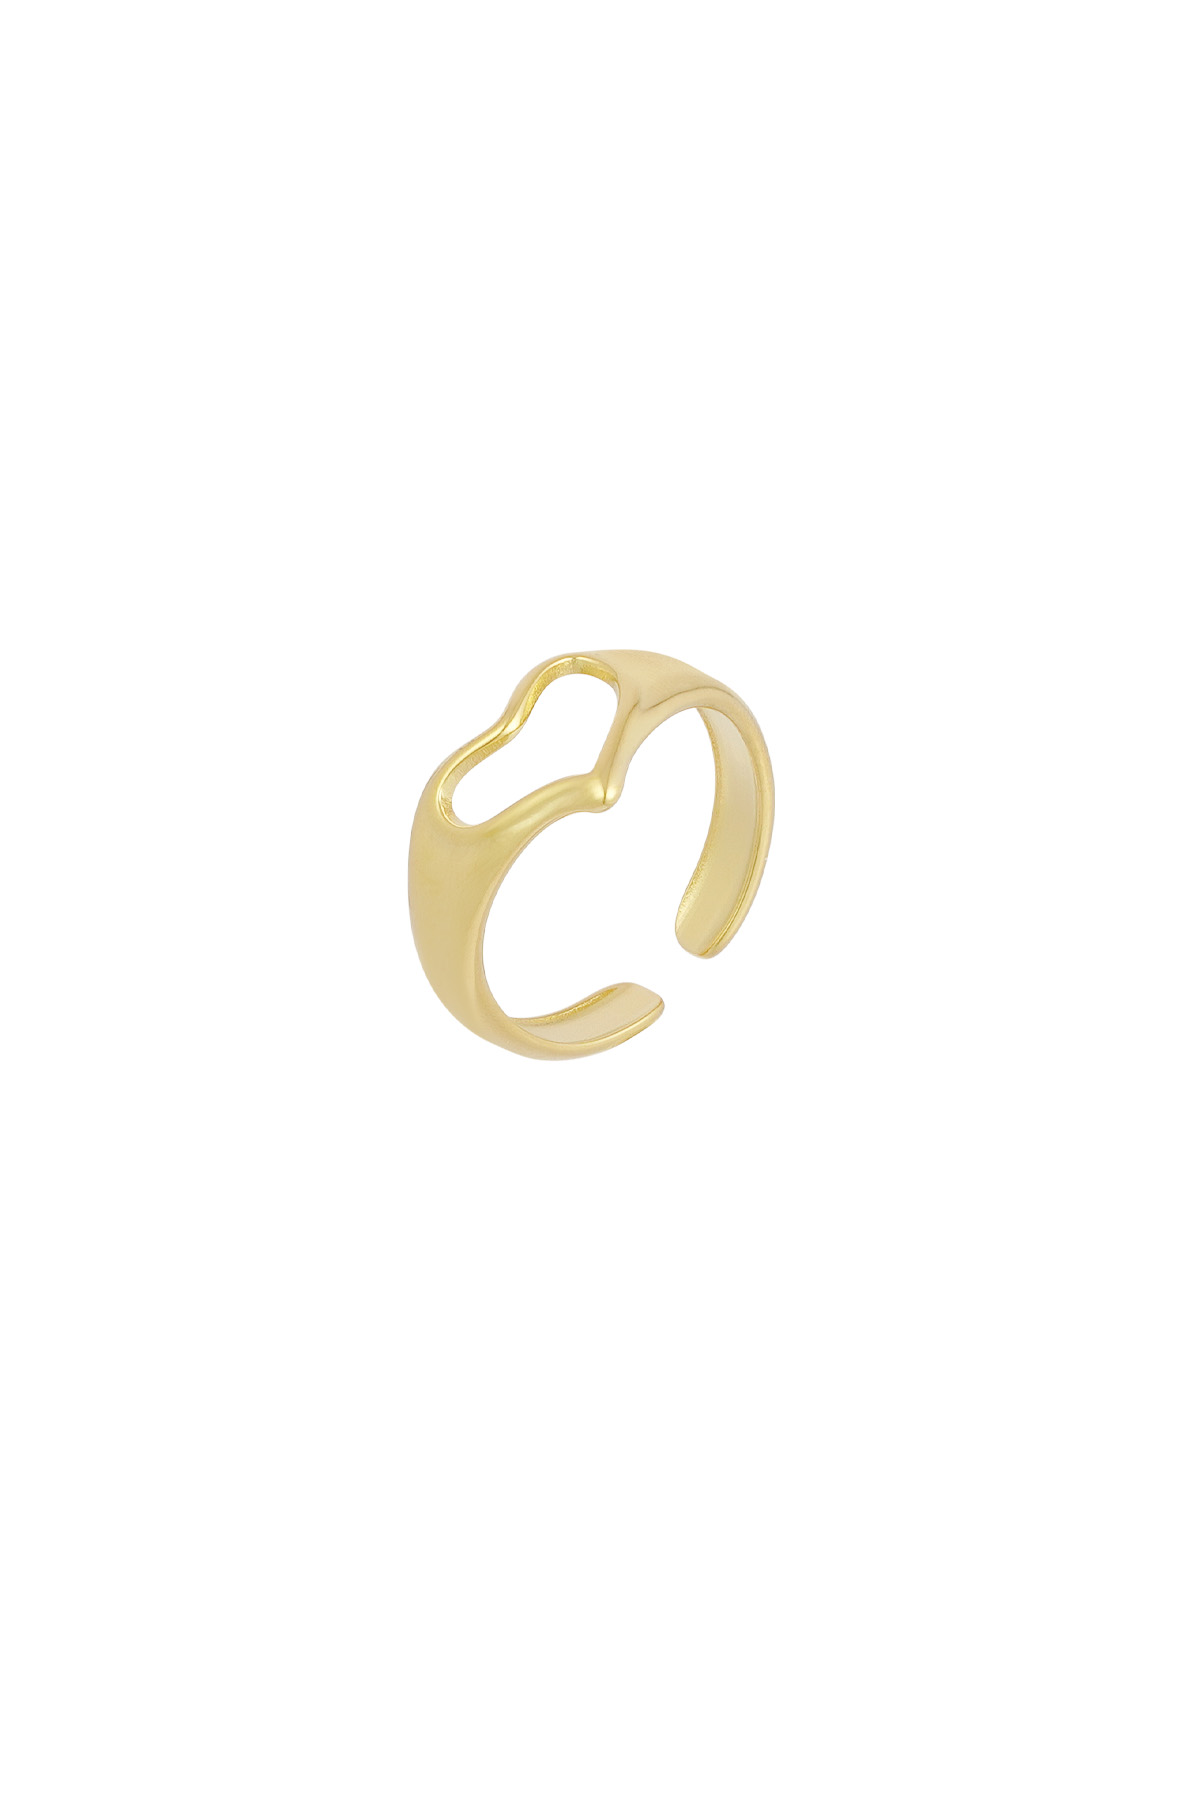 Ring love hands - gold h5 Picture3